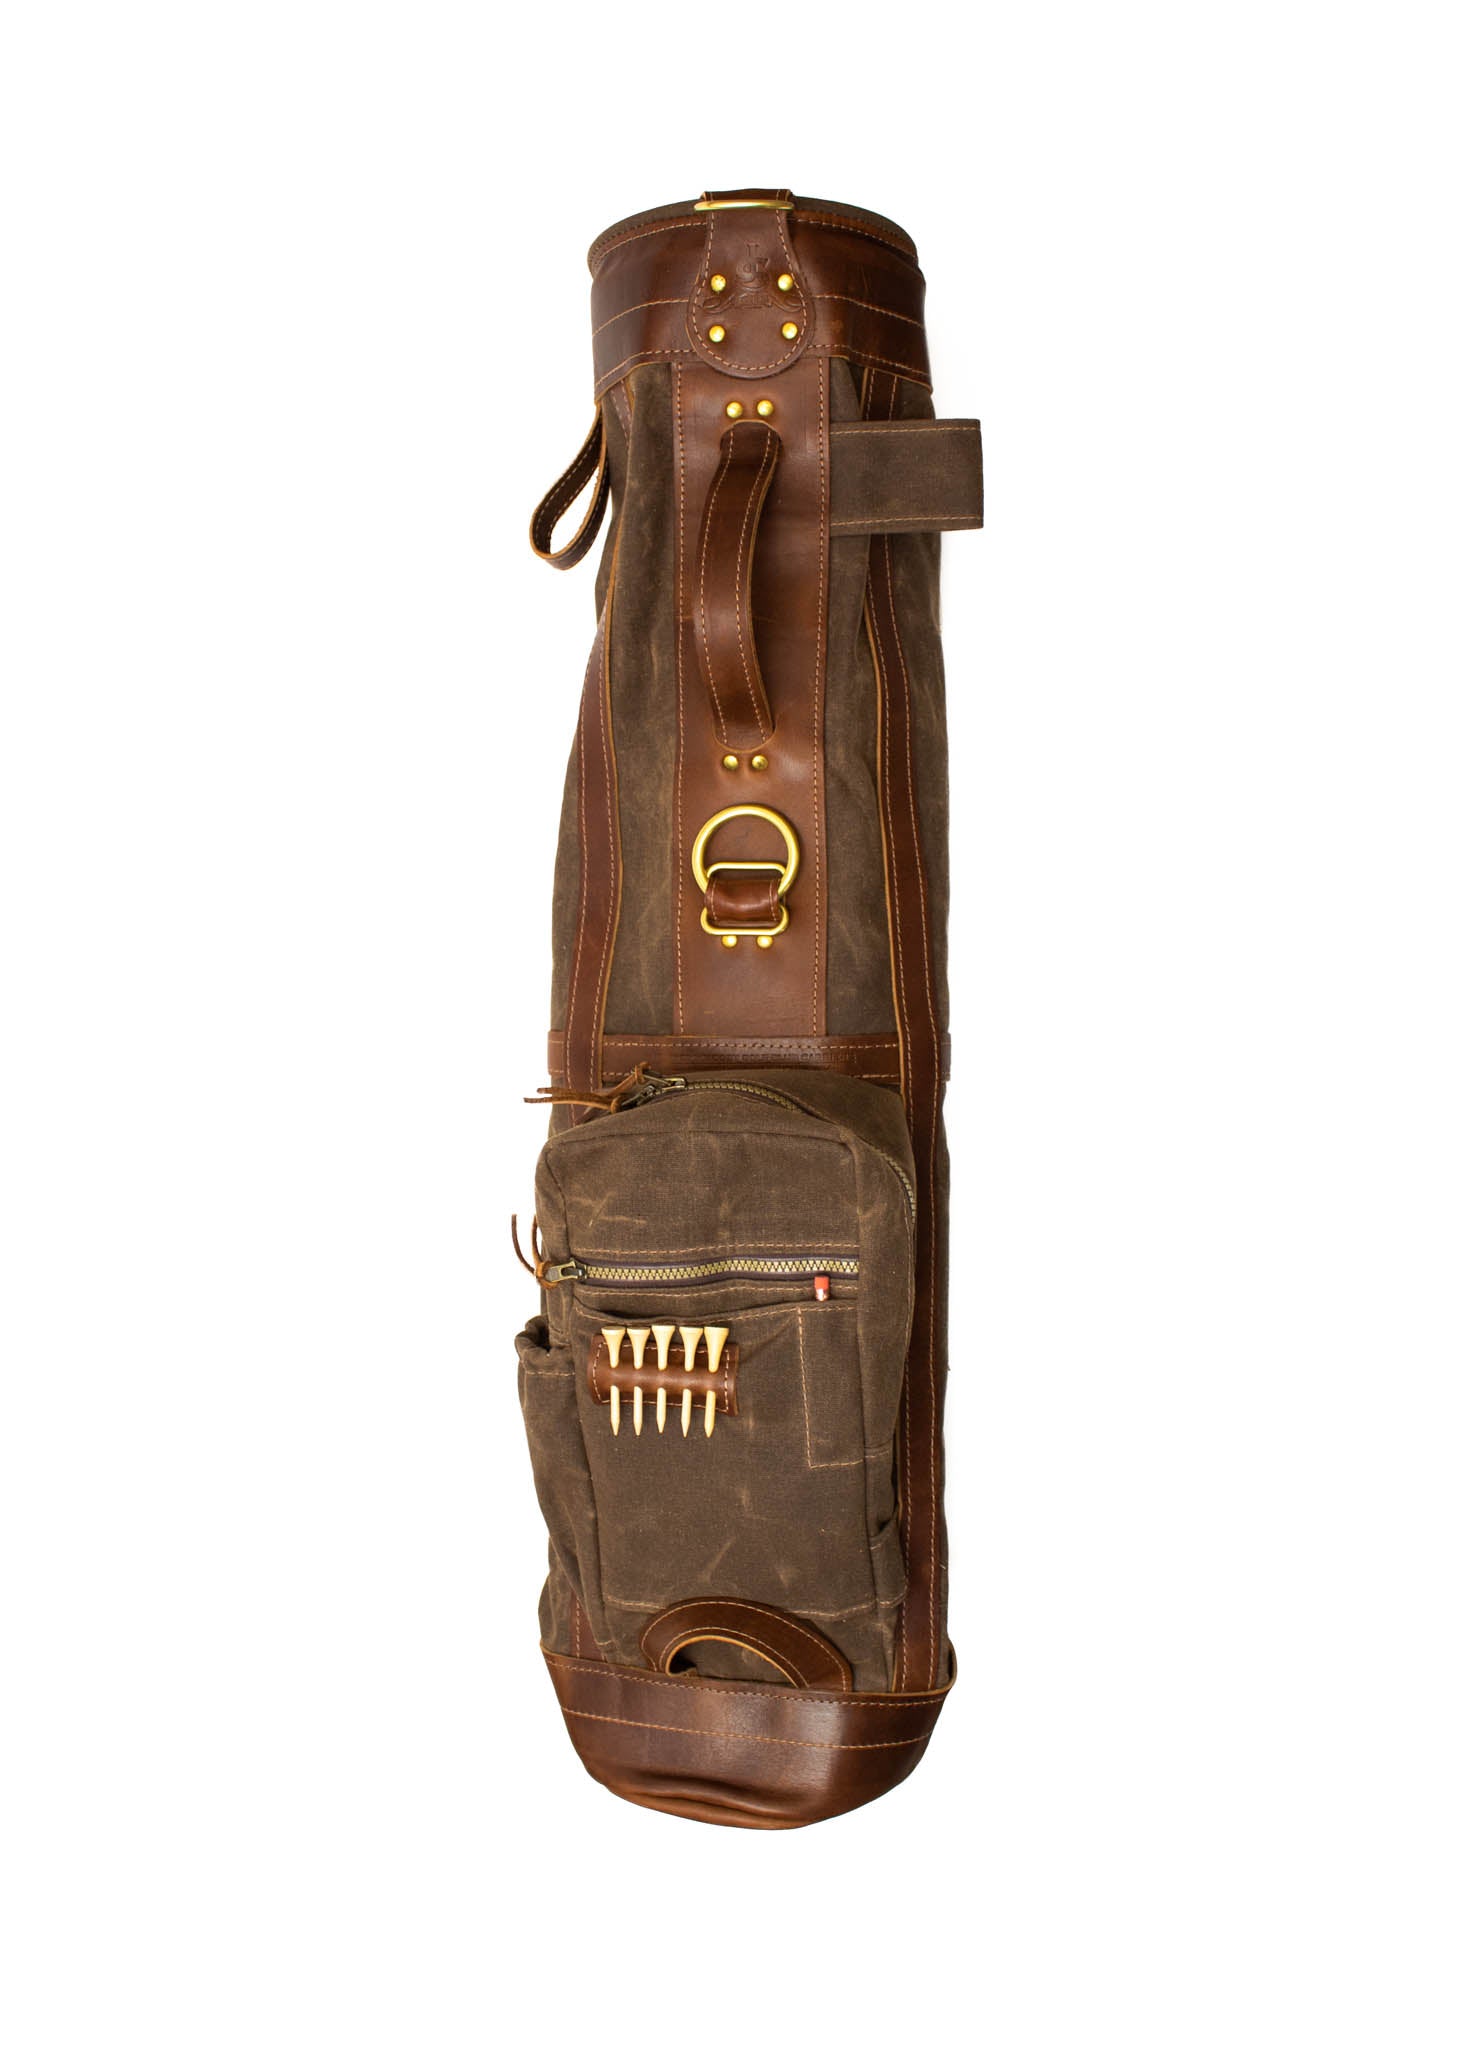 The Caddy Golf Bag- Bourbon Waxed Canvas with Chestnut Leather- Steurer & Jacoby